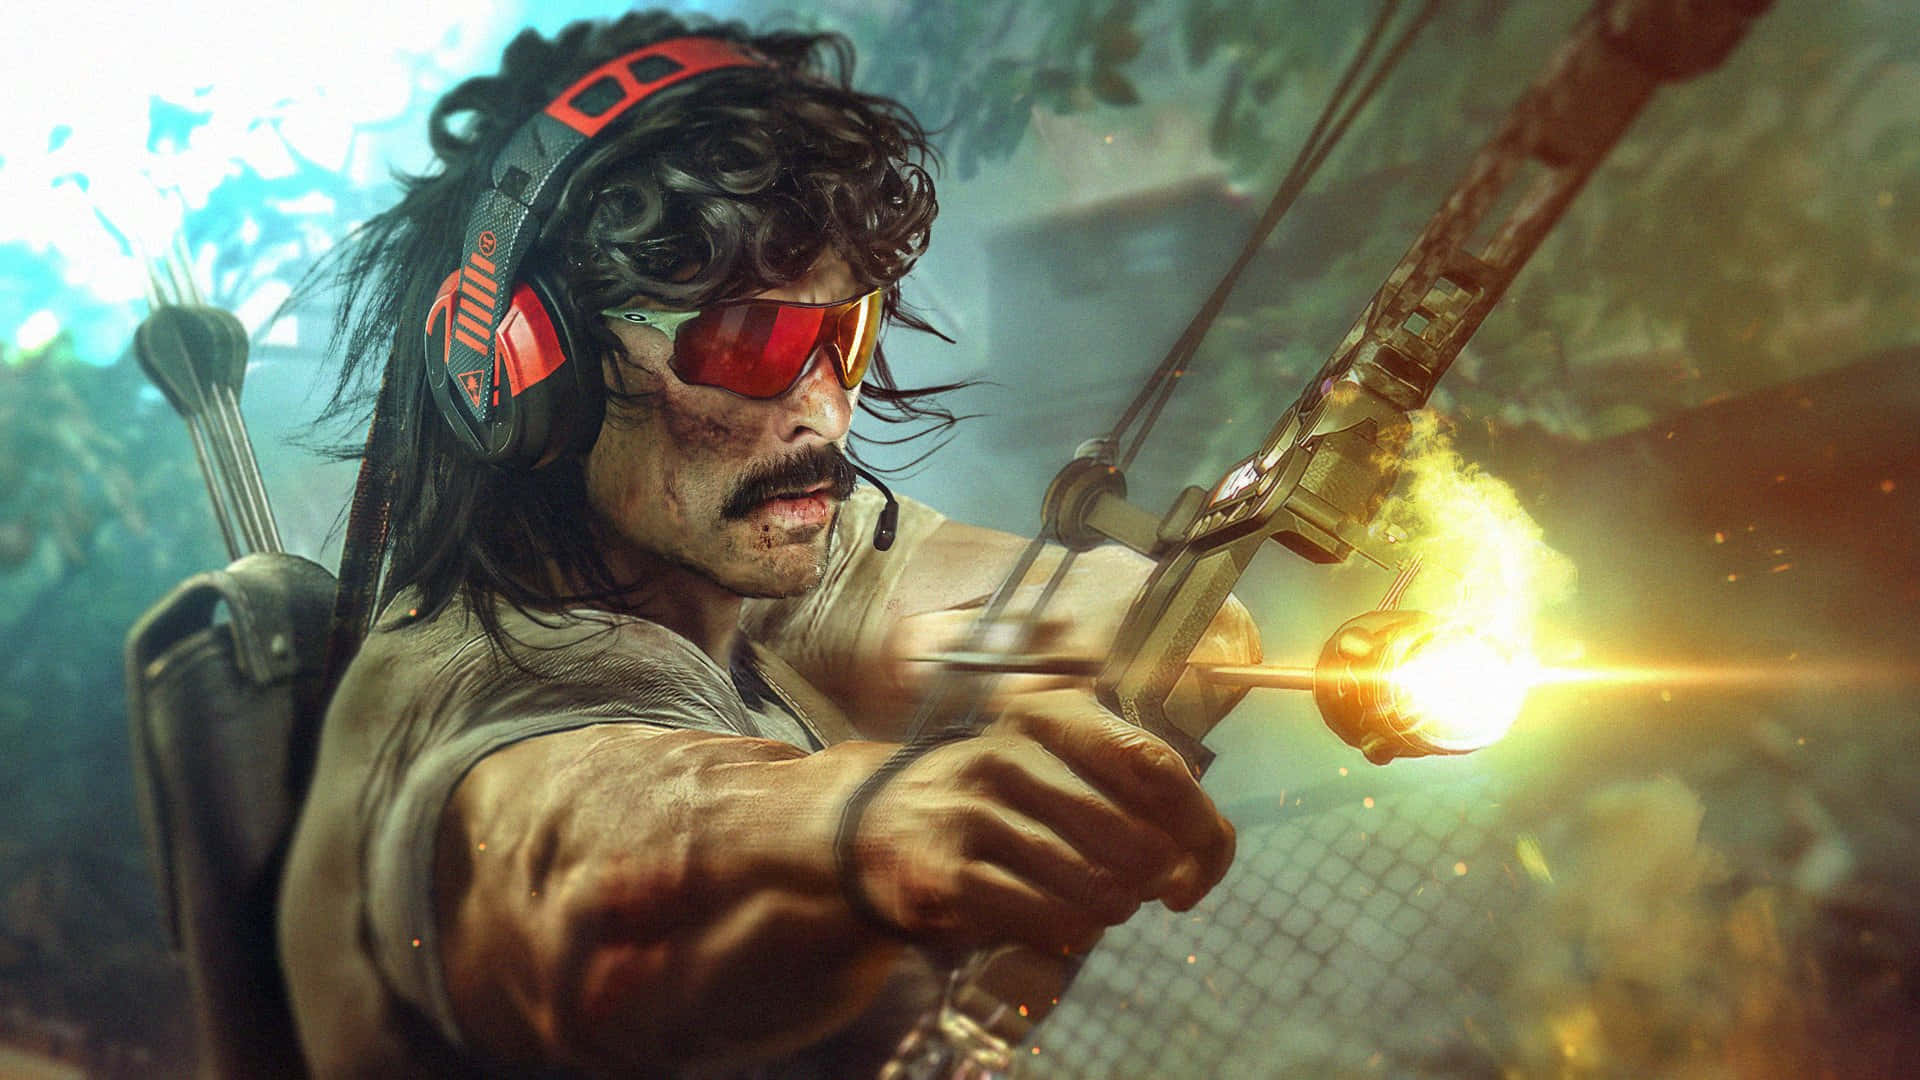 Dr Disrespect With Bow And Arrow Wallpaper